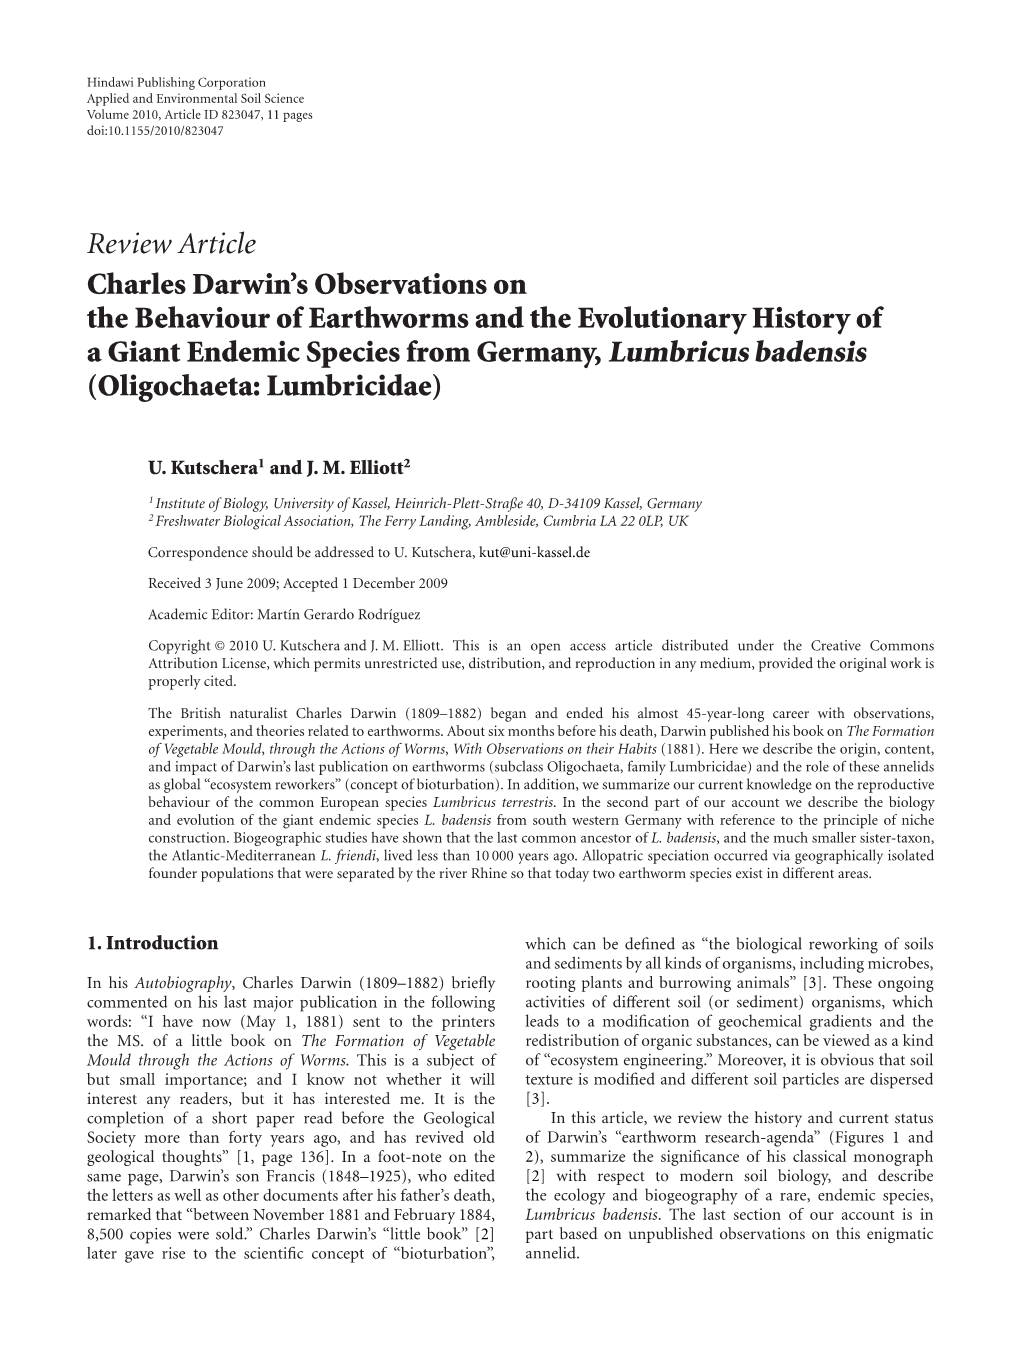 Charles Darwin's Observations on the Behaviour of Earthworms and the Evolutionary History of a Giant Endemic Species from Germany, Lumbricus Badensis (Oligochaeta: Lumbricidae)